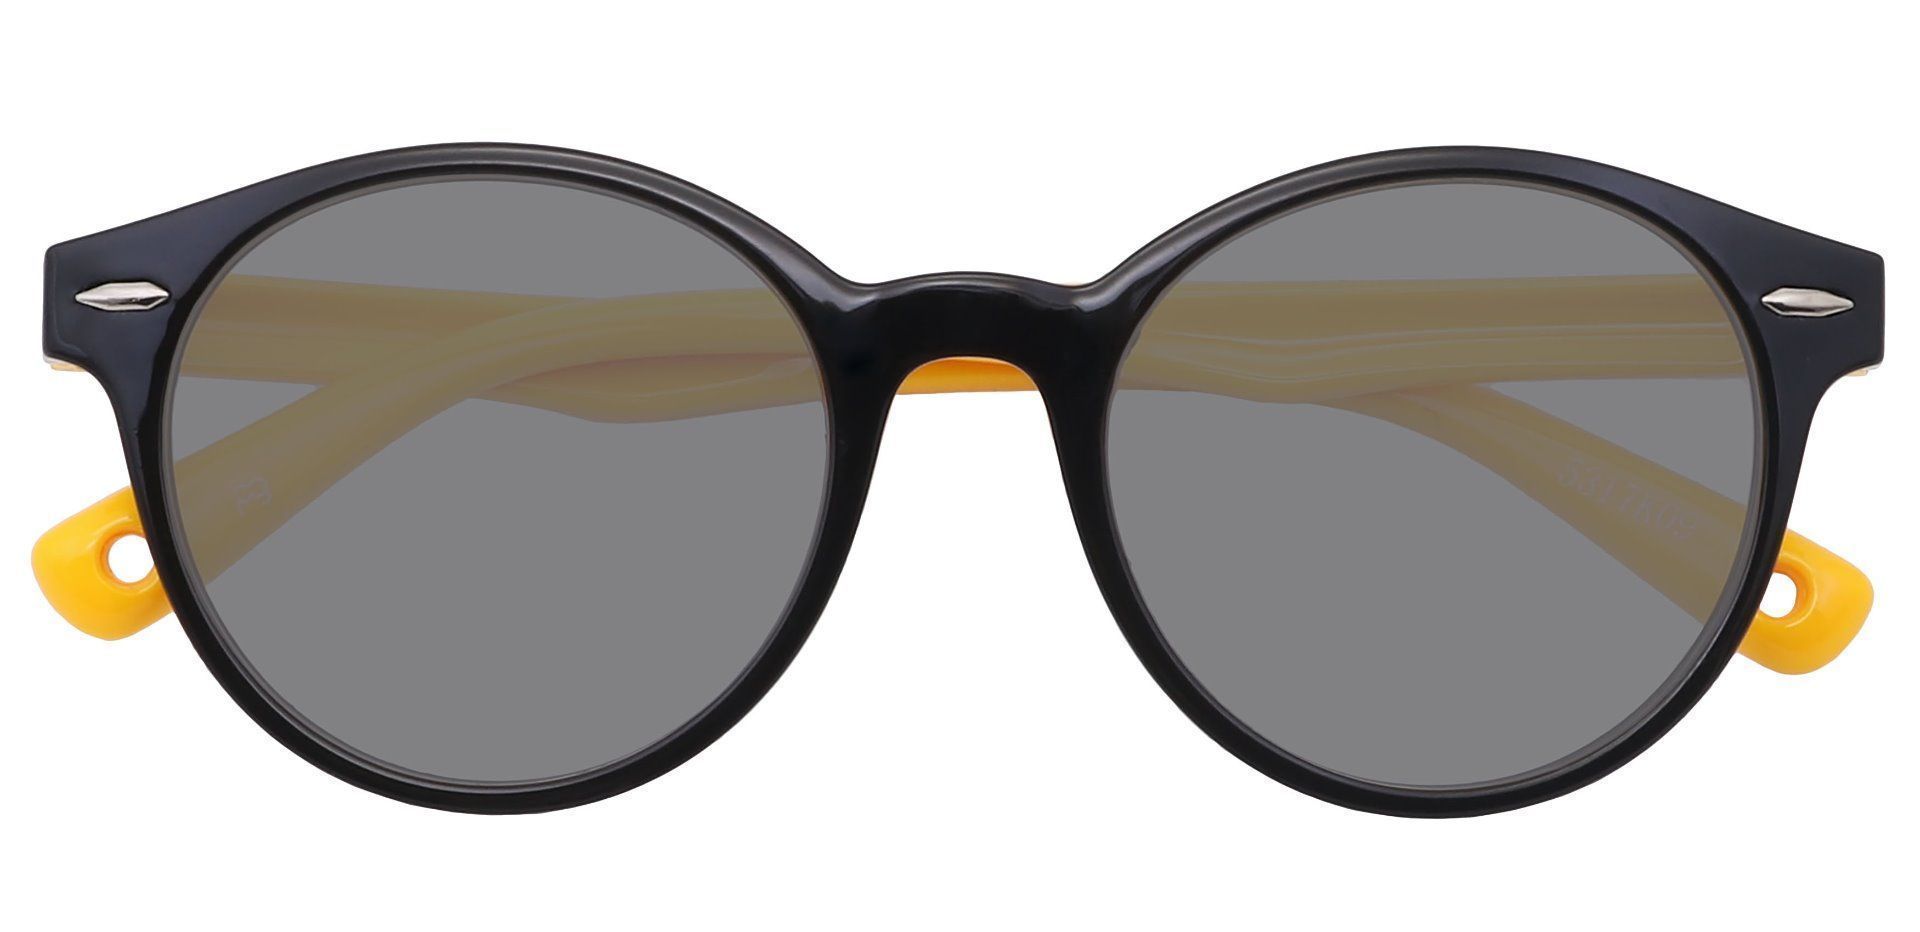 Harris Round Non-Rx Sunglasses - Black Frame With Gray Lenses